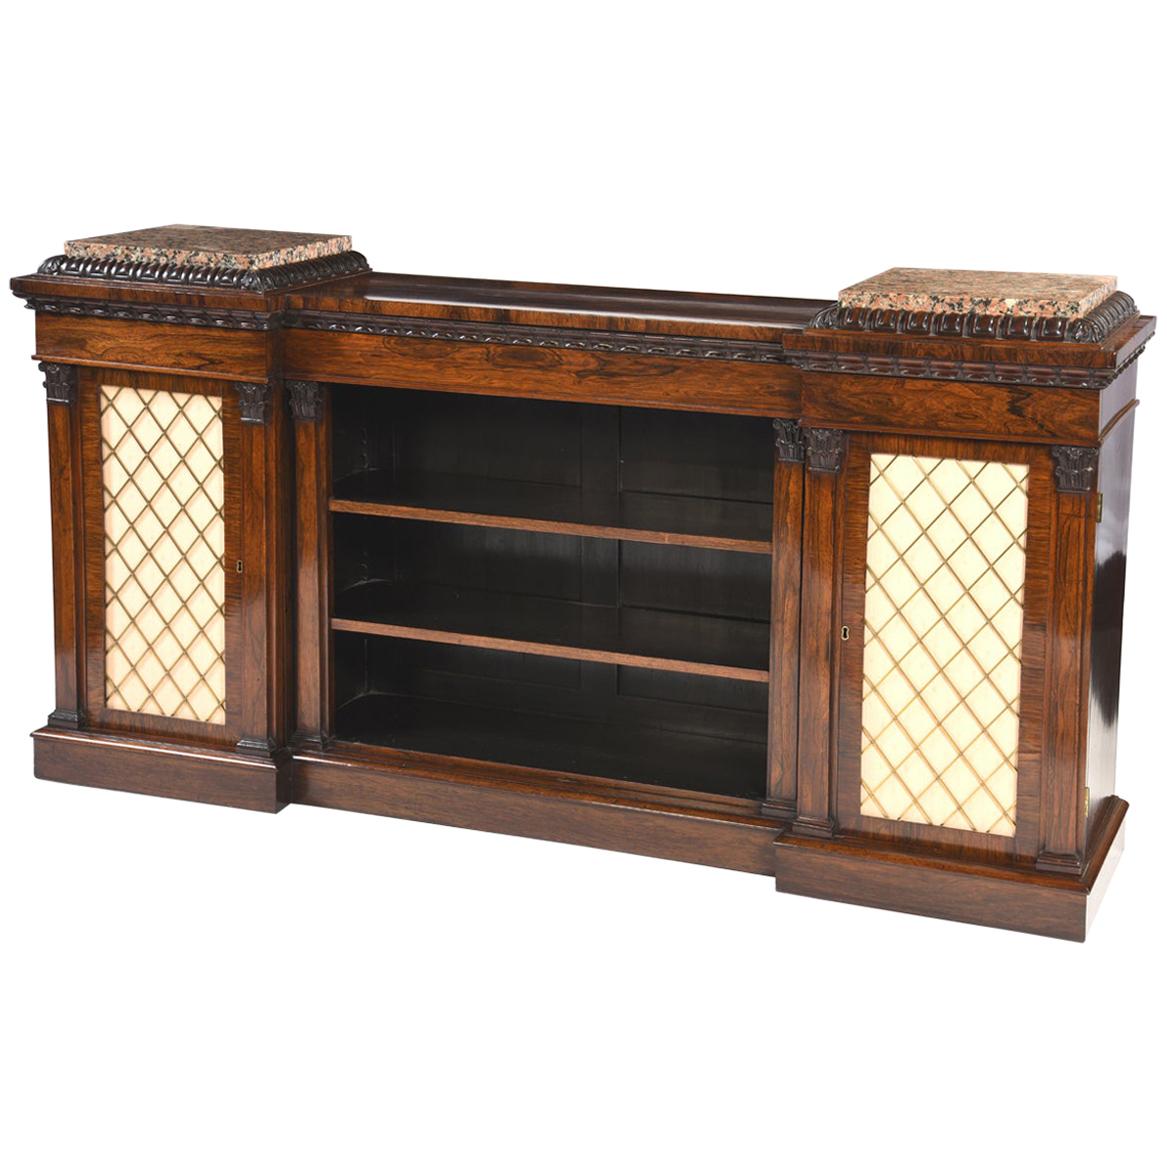 English Regency Period Low Rosewood Bookcase with Marble Tablets, circa 1810 For Sale